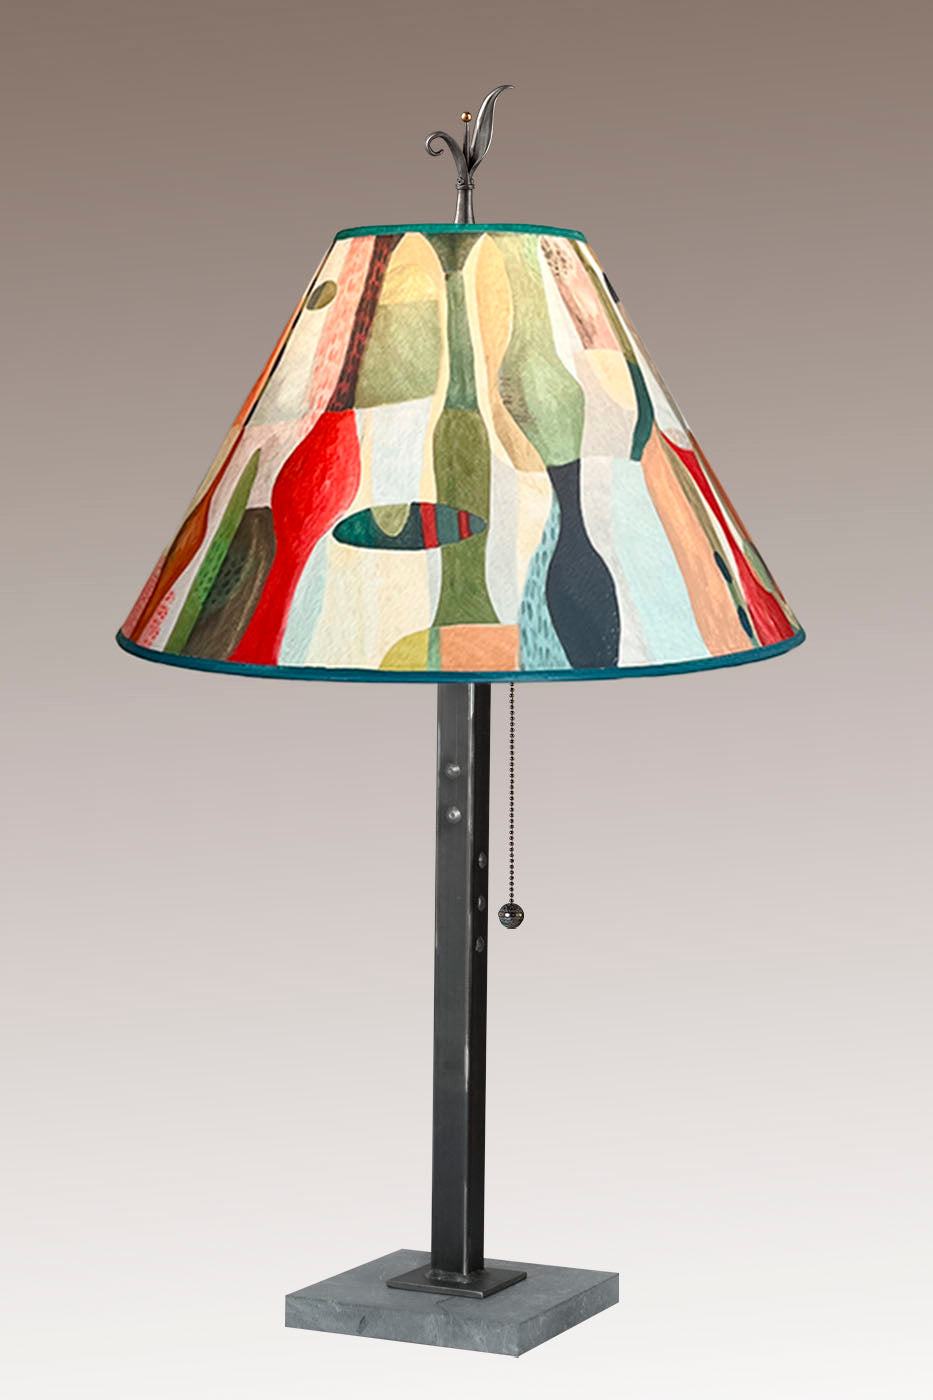 Janna Ugone & Co Table Lamp Steel Table Lamp with Medium Conical Shade in Riviera in Poppy